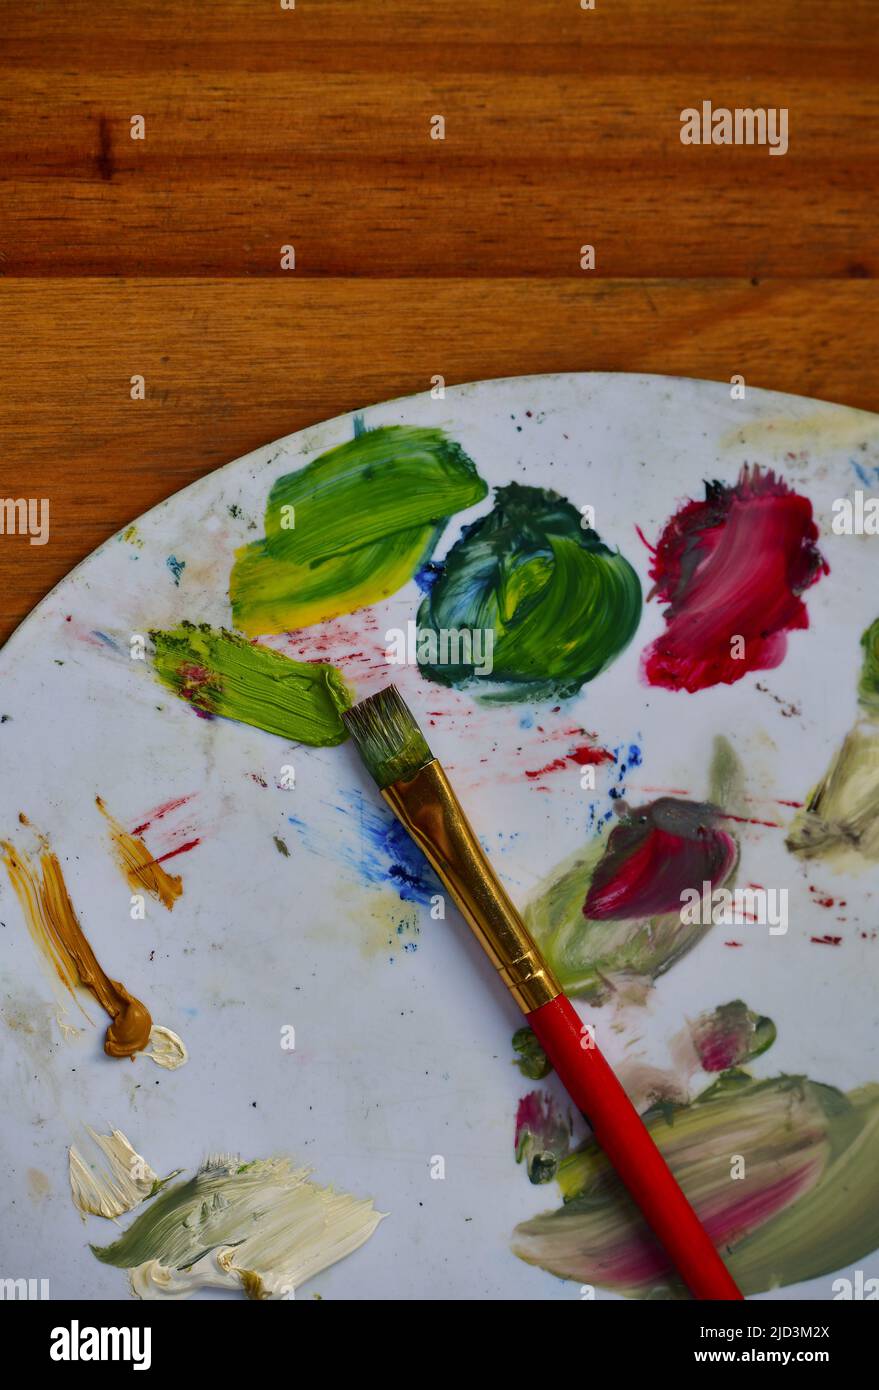 Top view of a painters palette with colors and brush Stock Photo